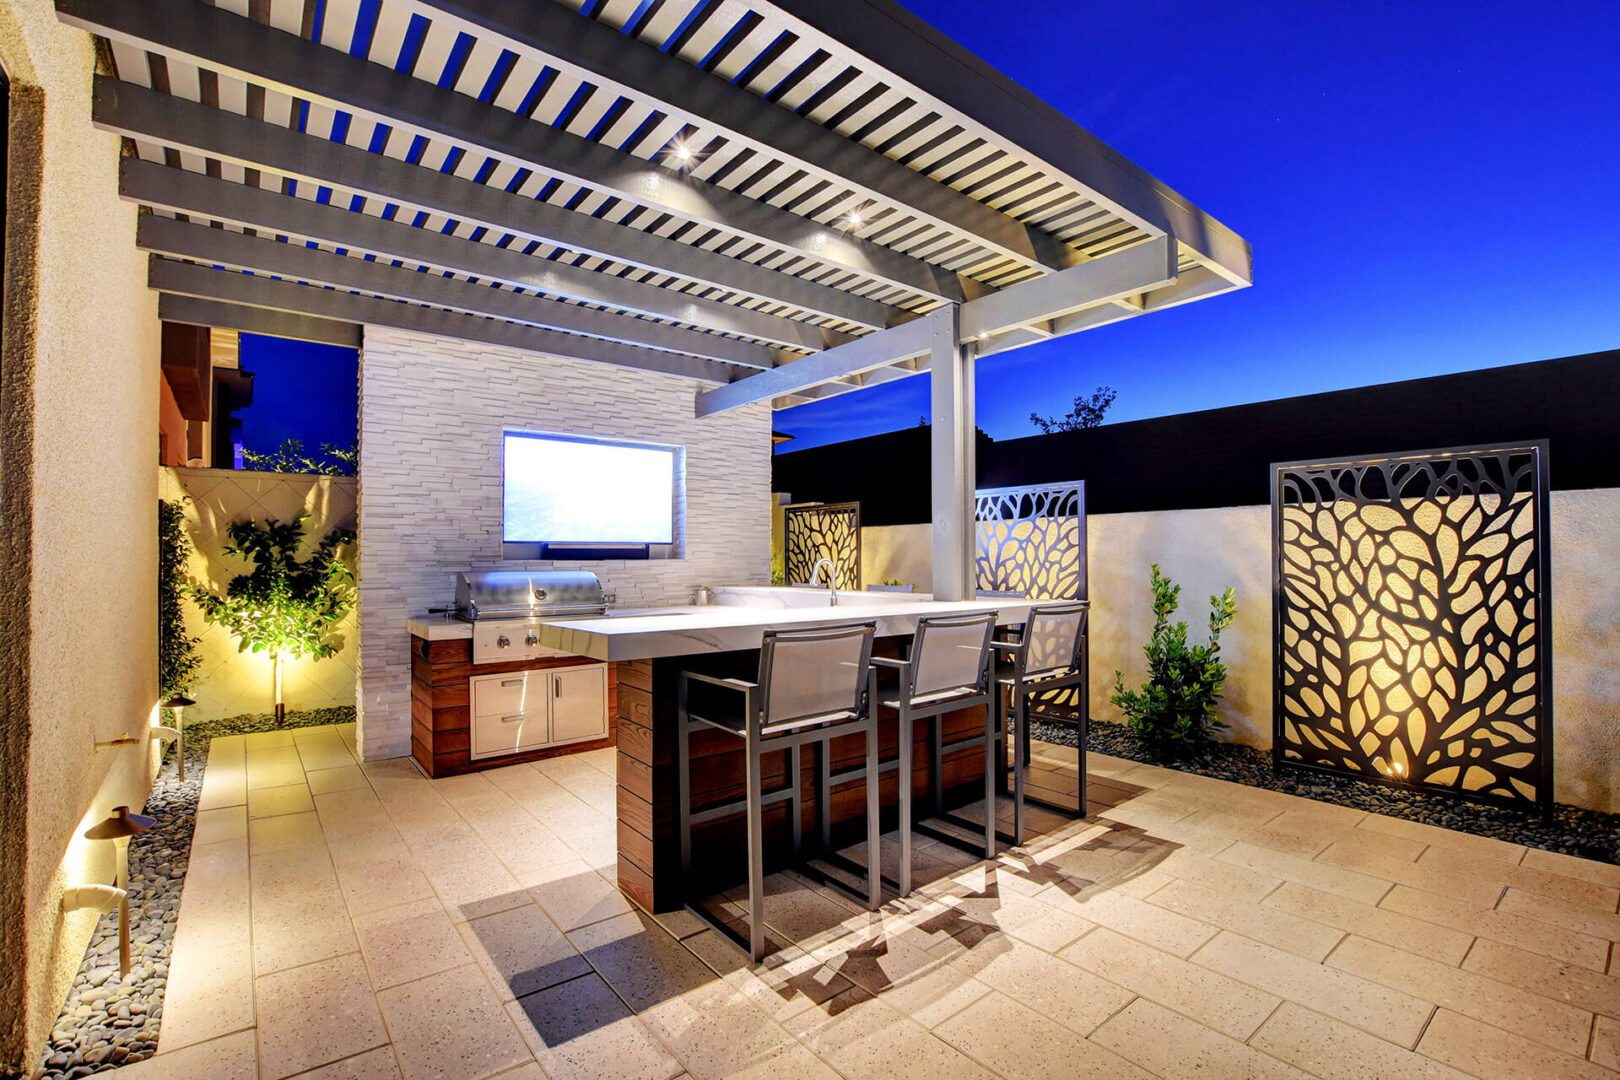 Beautiful Custom Outdoor Living Area with Thermory T&G Ash Cladding Outdoor Kitchen Finish, Duralum Attached Lattice Patio Cover, and Stacked Stone Finished Media Wall